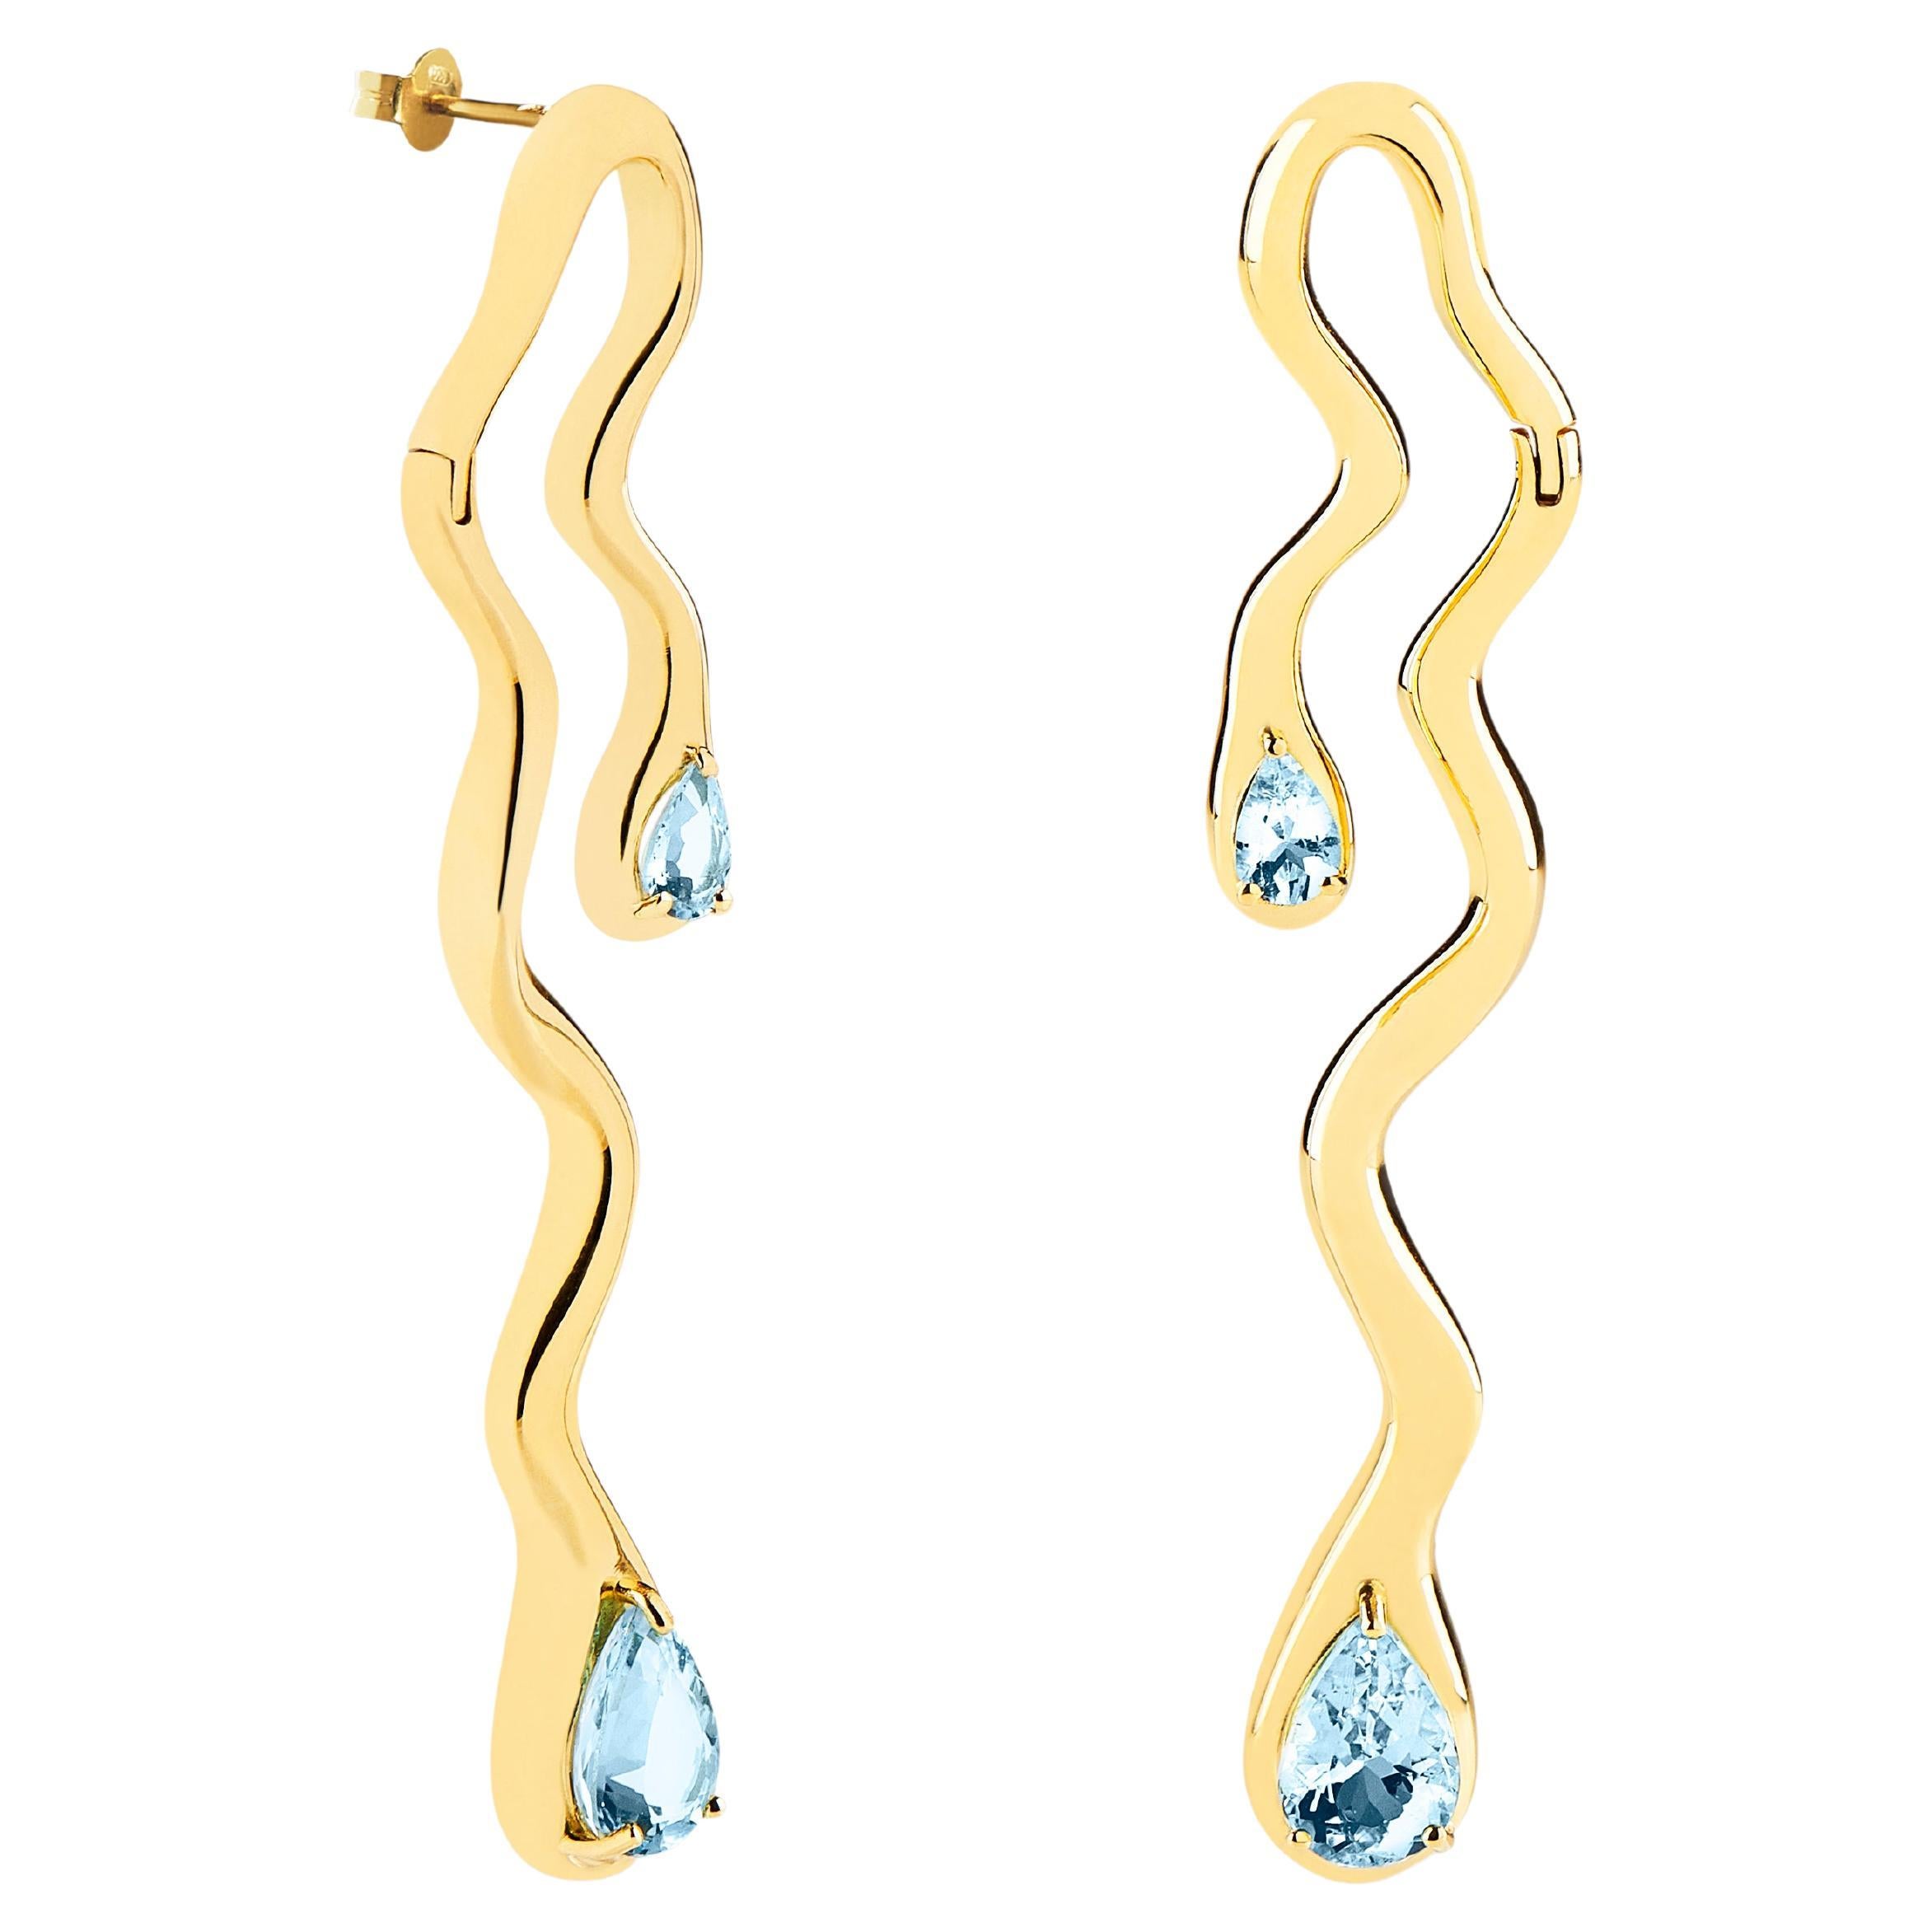 Long, articulated earrings in 18kt gold and 3.76 carat Aquamarine For Sale